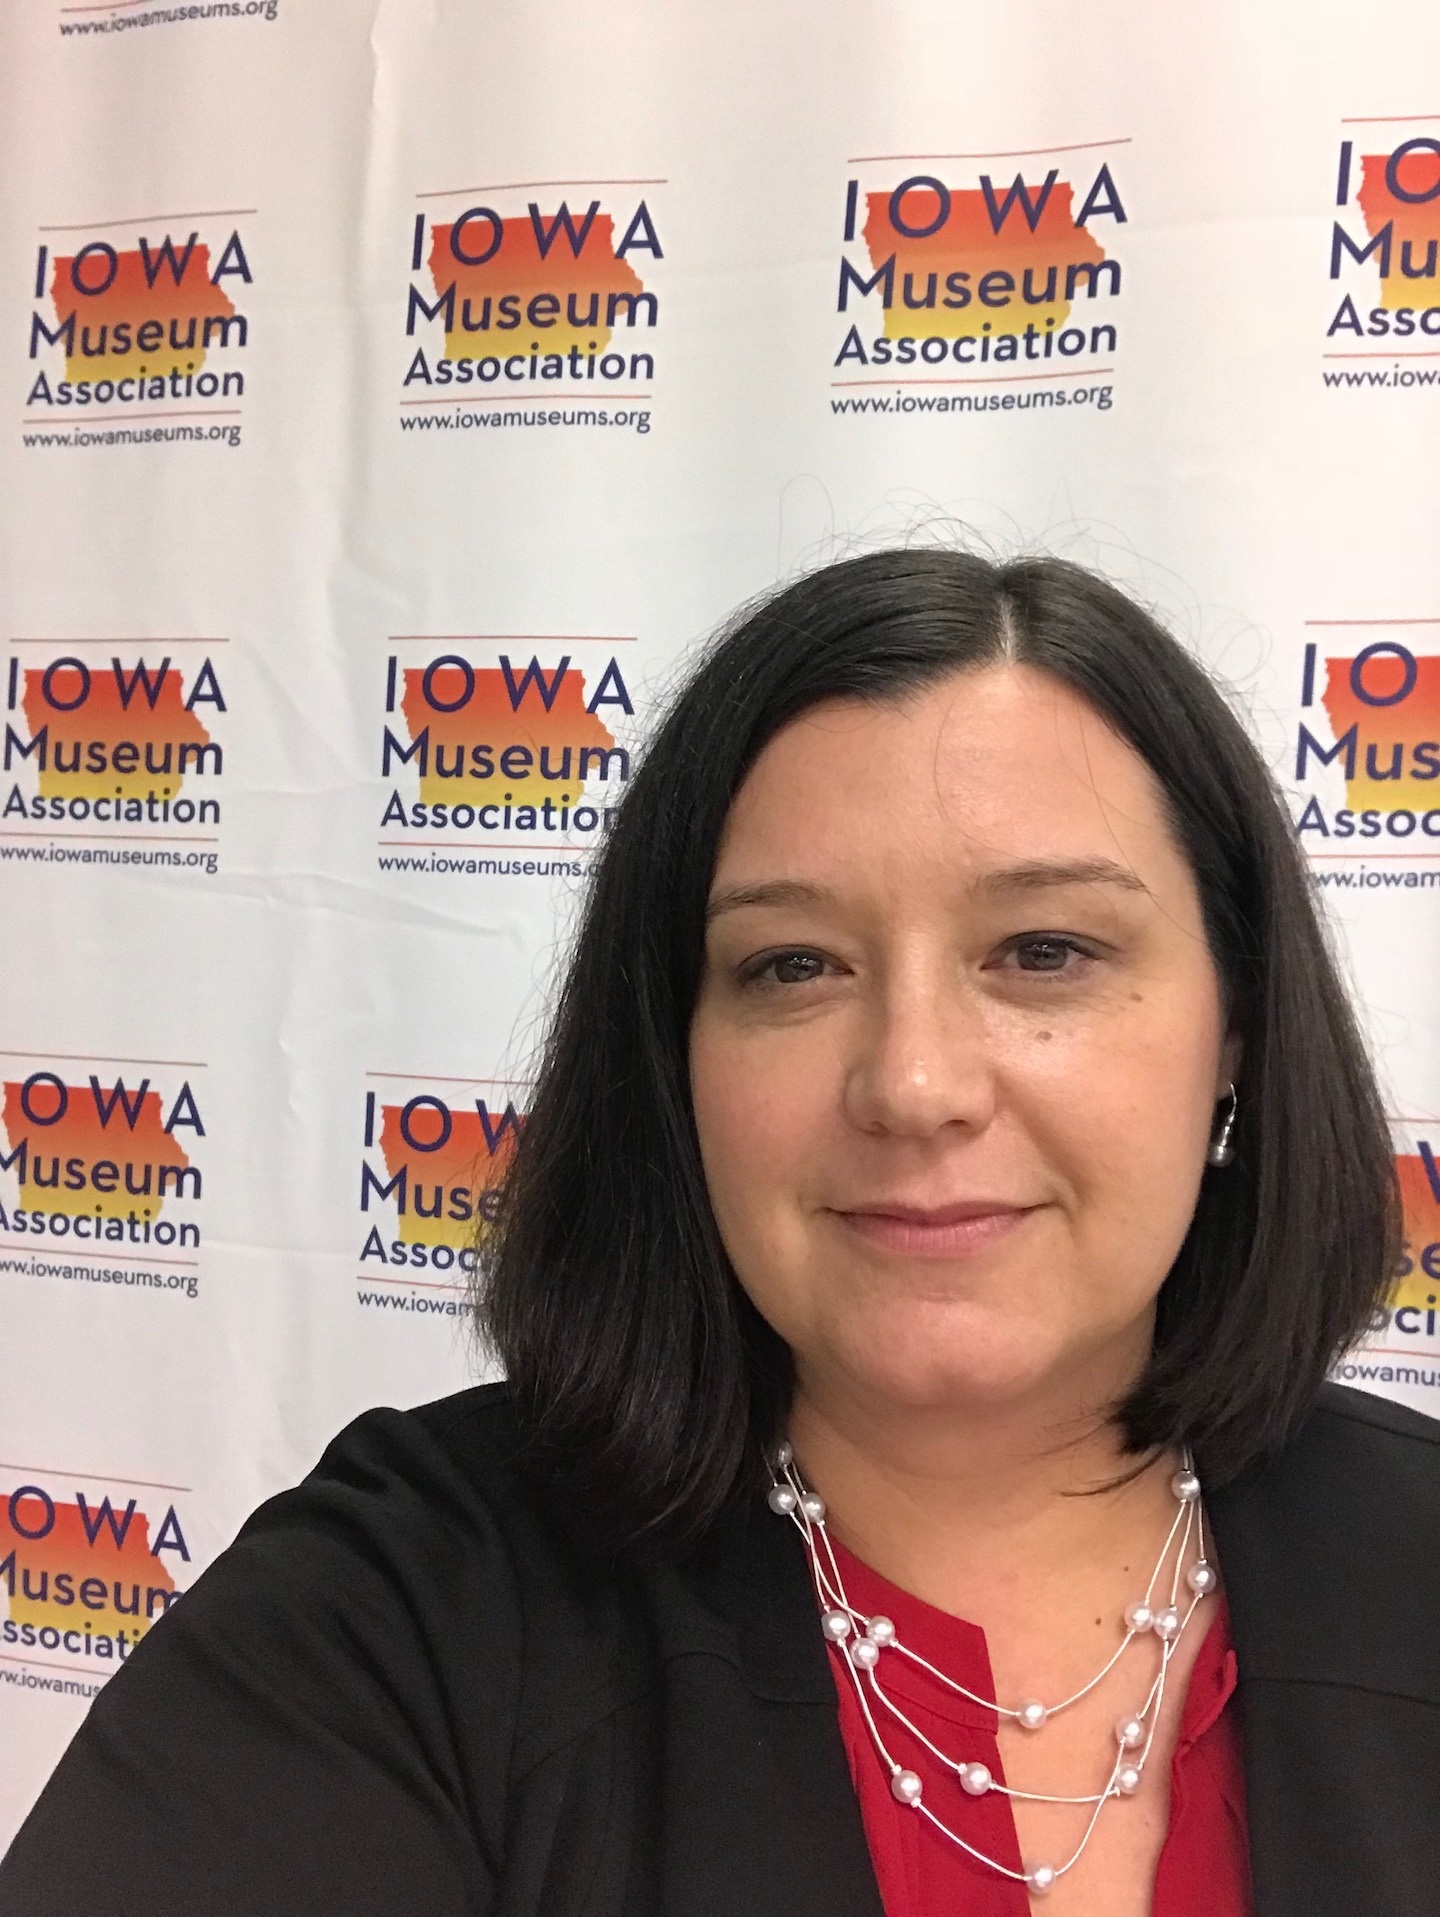 Image of a white woman standing in front of an Iowa Museums Association step and repeat. She has shoulder length brown hair combed to the left side wearing a dark colored jacket and red shirt.